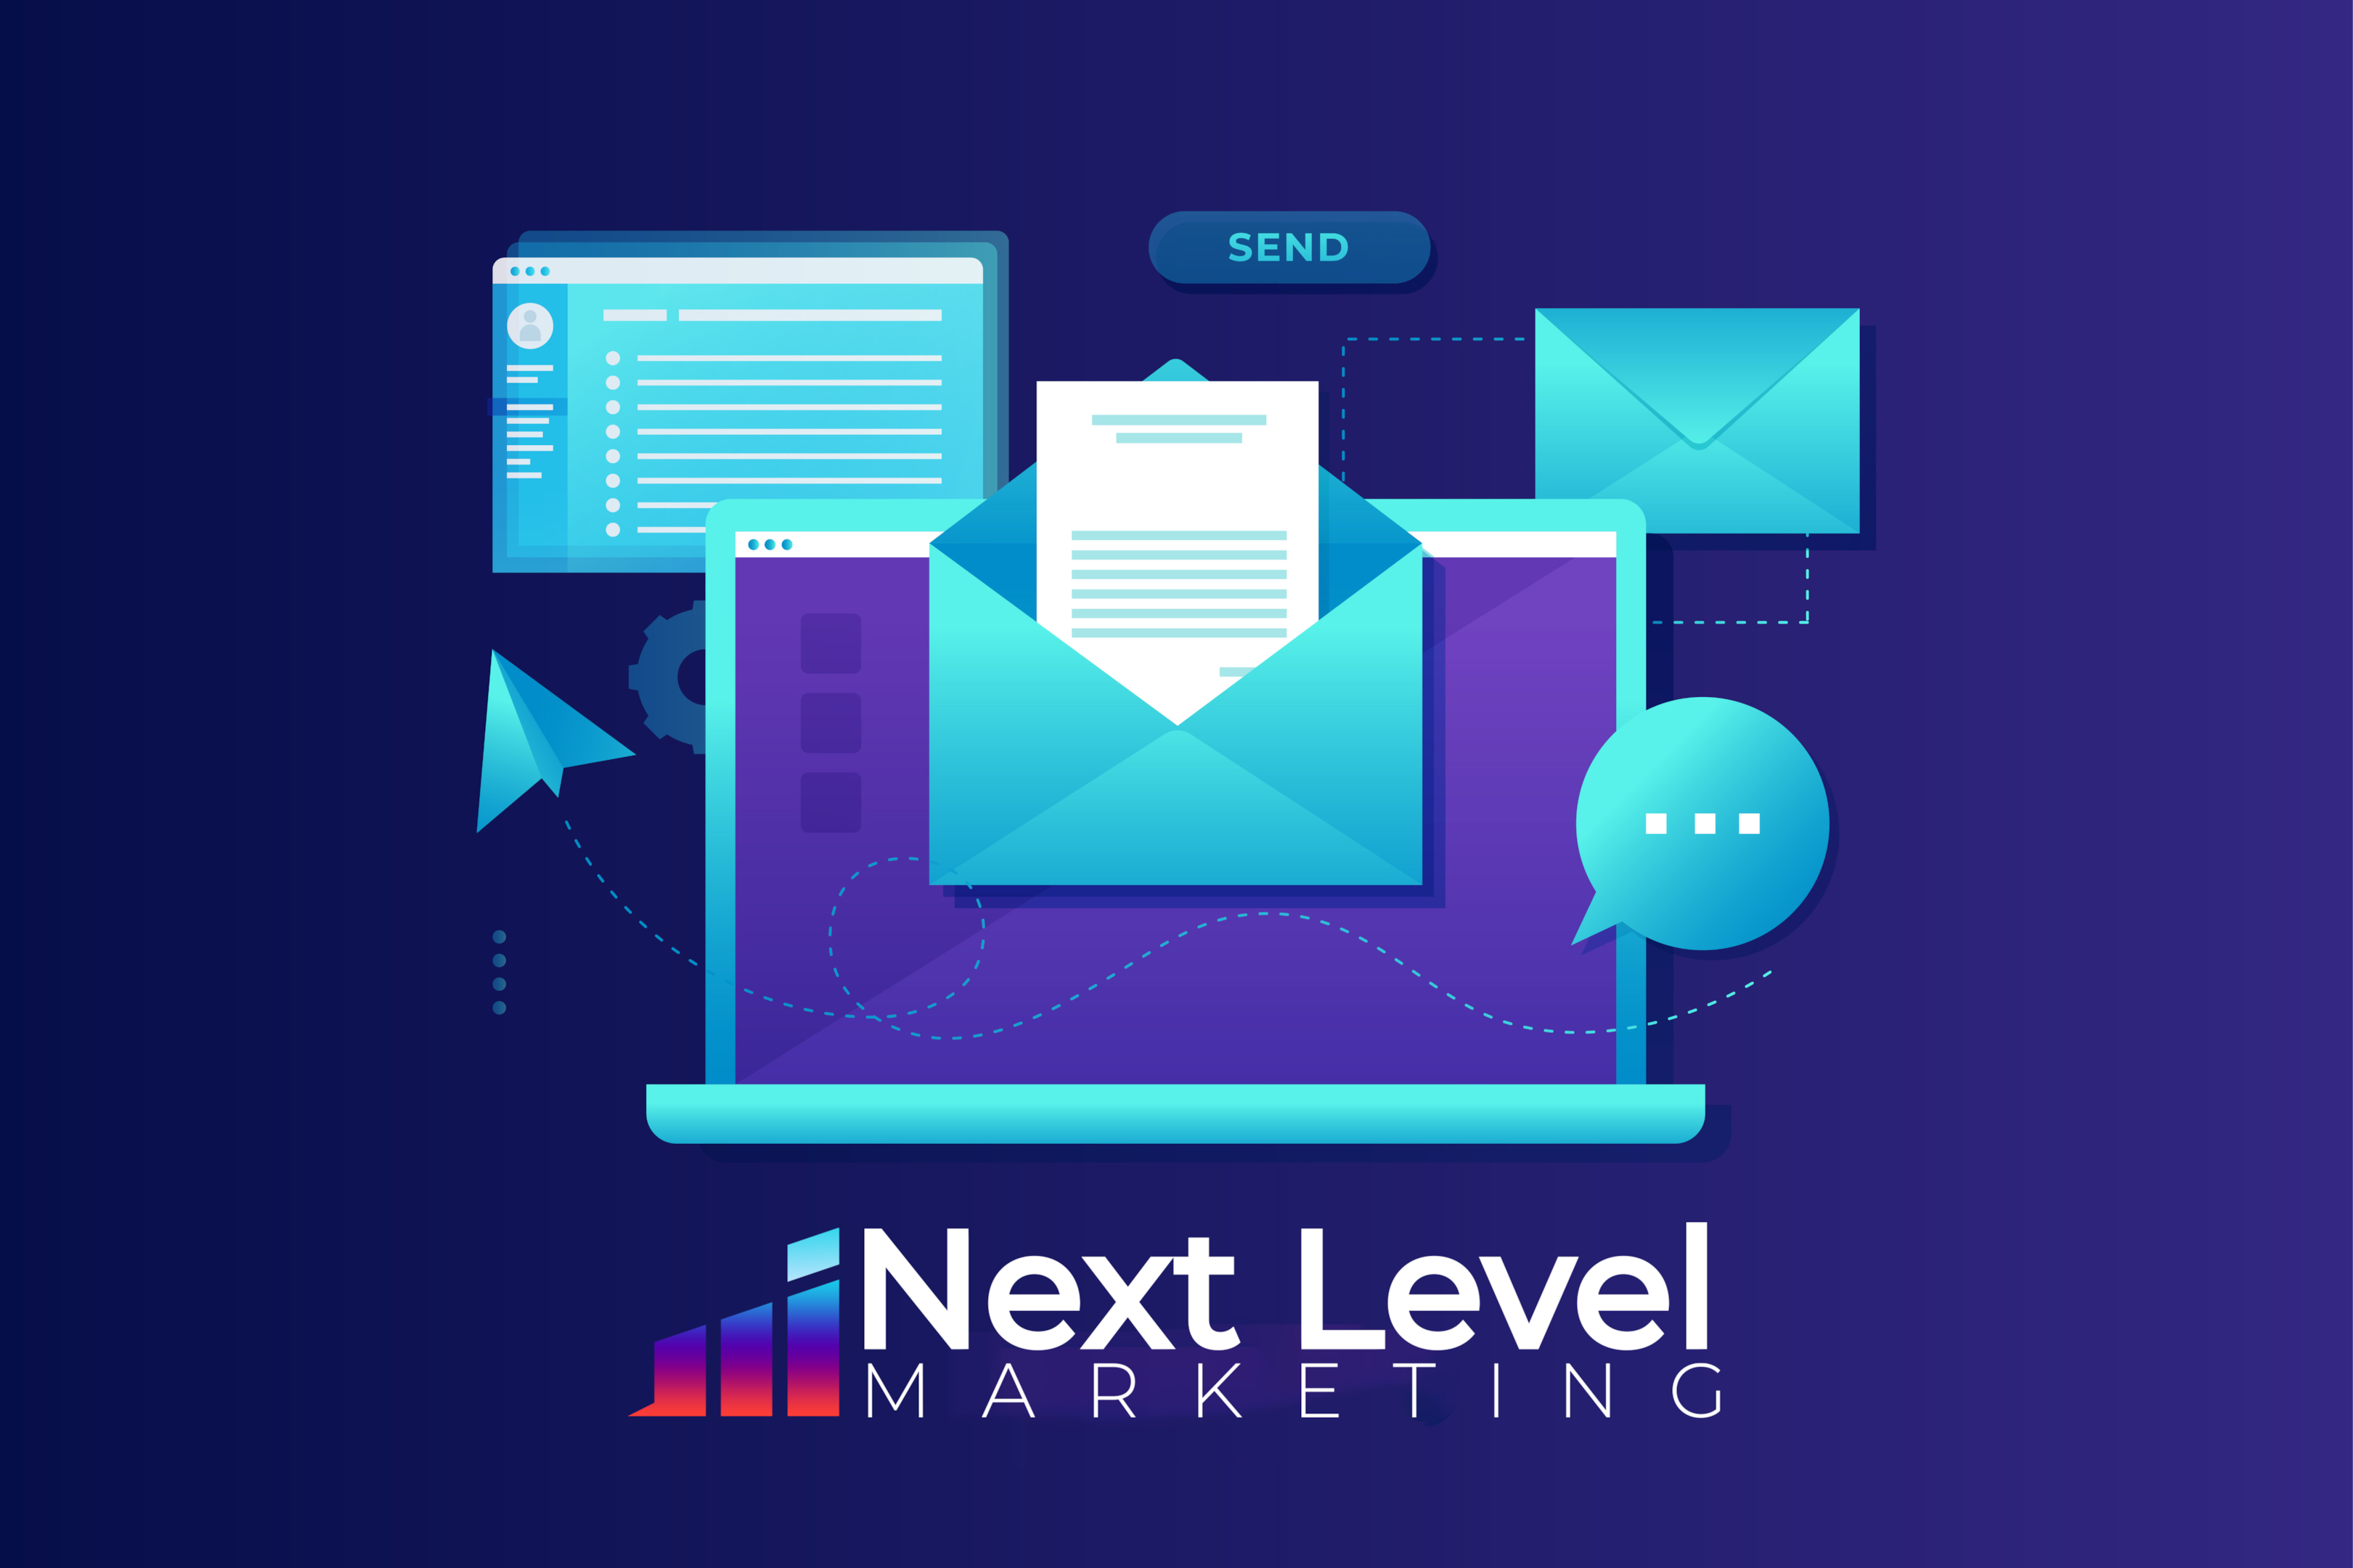 email marketing best practices made easy with Next Level SEM